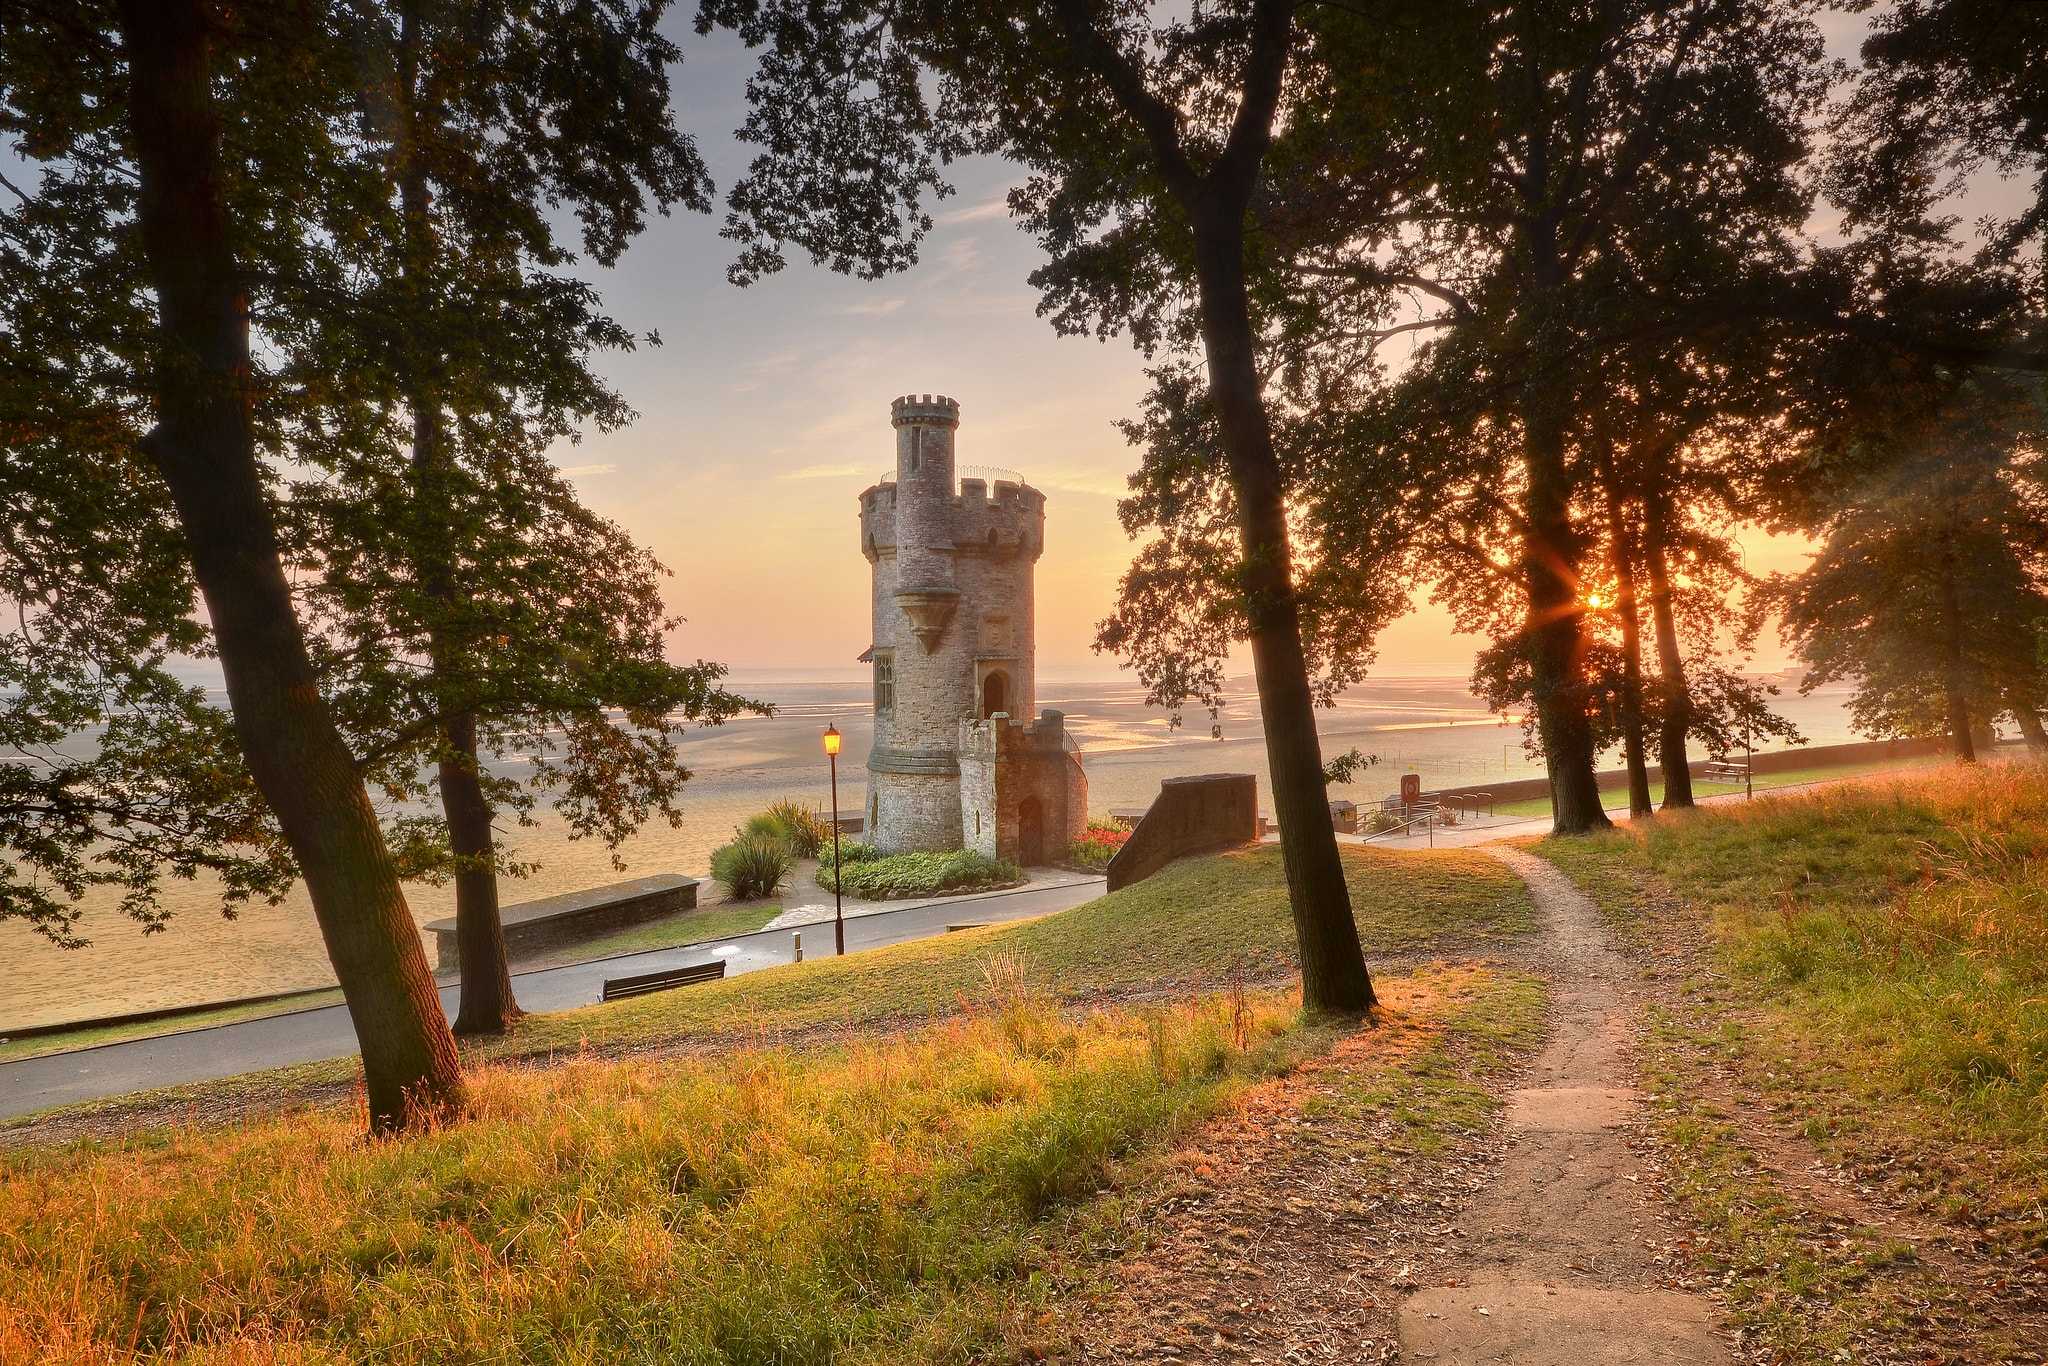 Image of Appley Tower, Isle of Wight, England